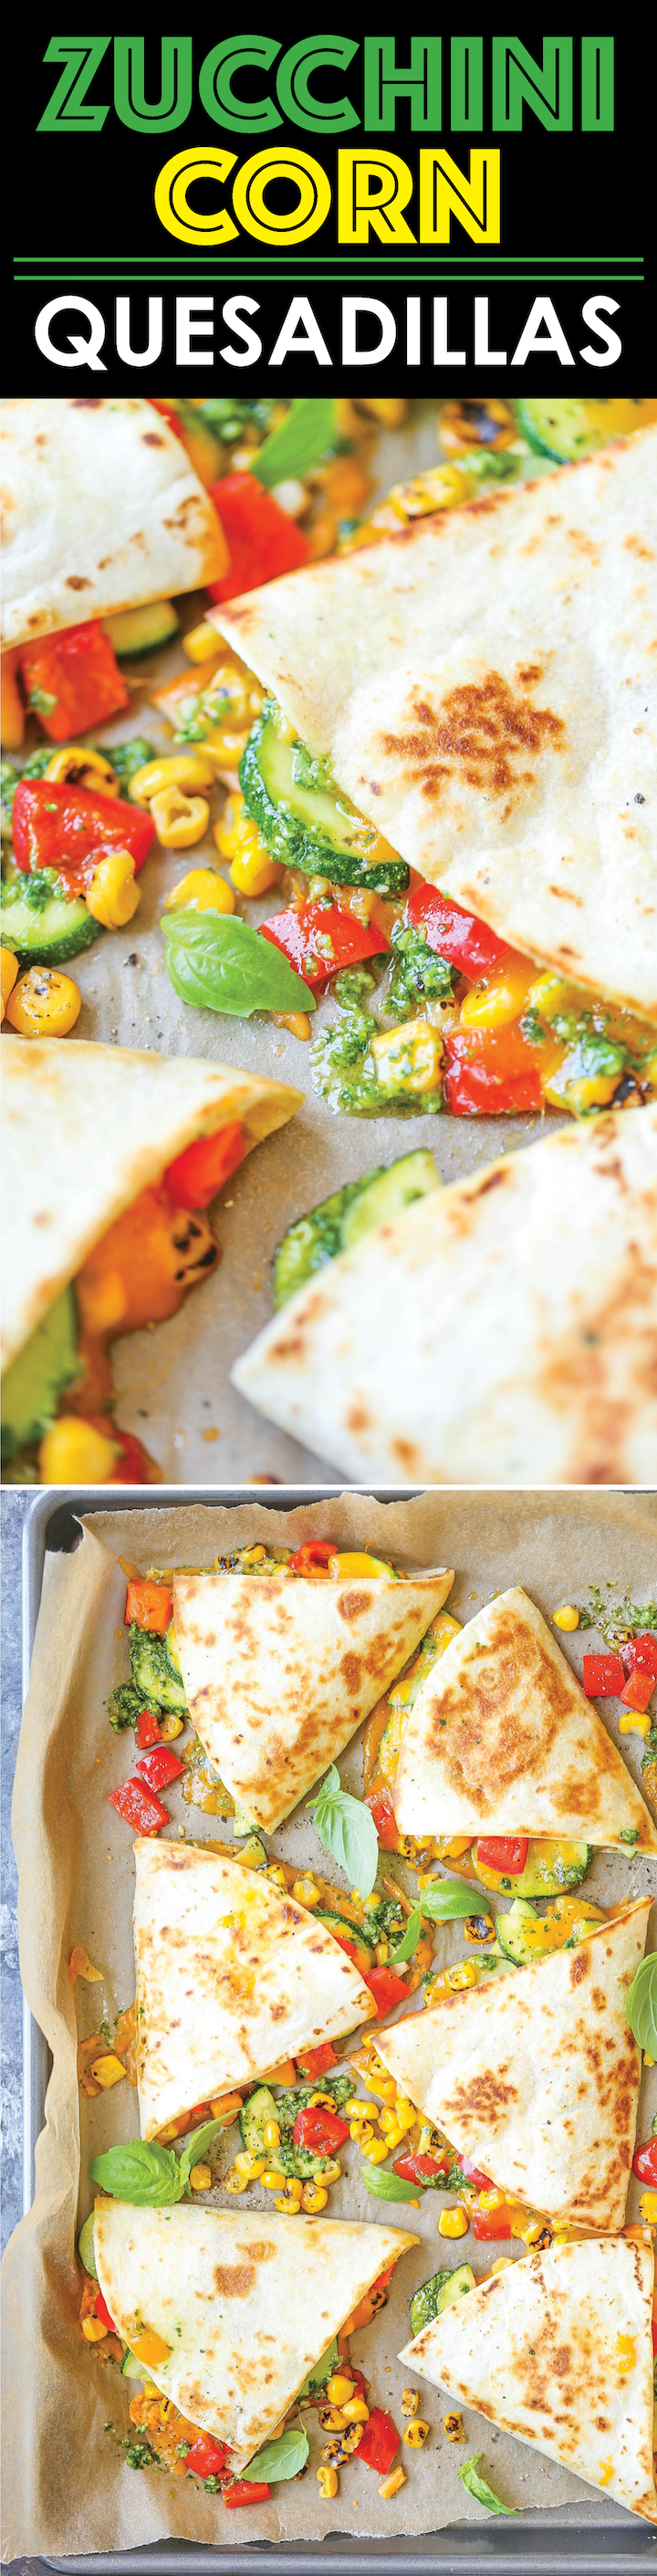 Zucchini Corn Quesadillas - This is so quick, simple and light! And with homemade (or store-bought pesto), this comes together in minutes. It's fool-proof!